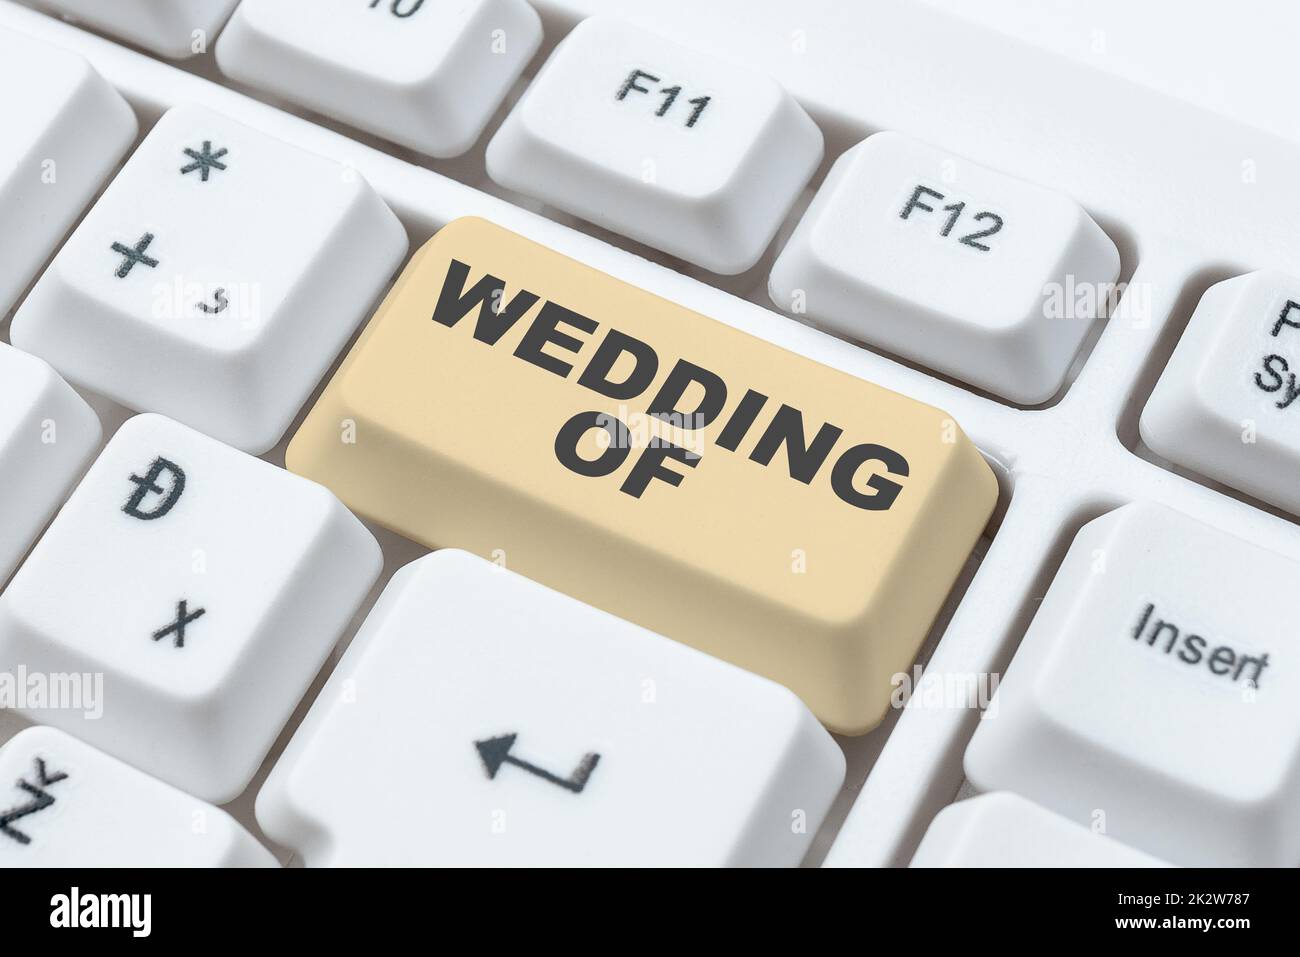 Sign displaying Wedding Of. Business overview announcing that man and now as married couple forever -48742 Stock Photo